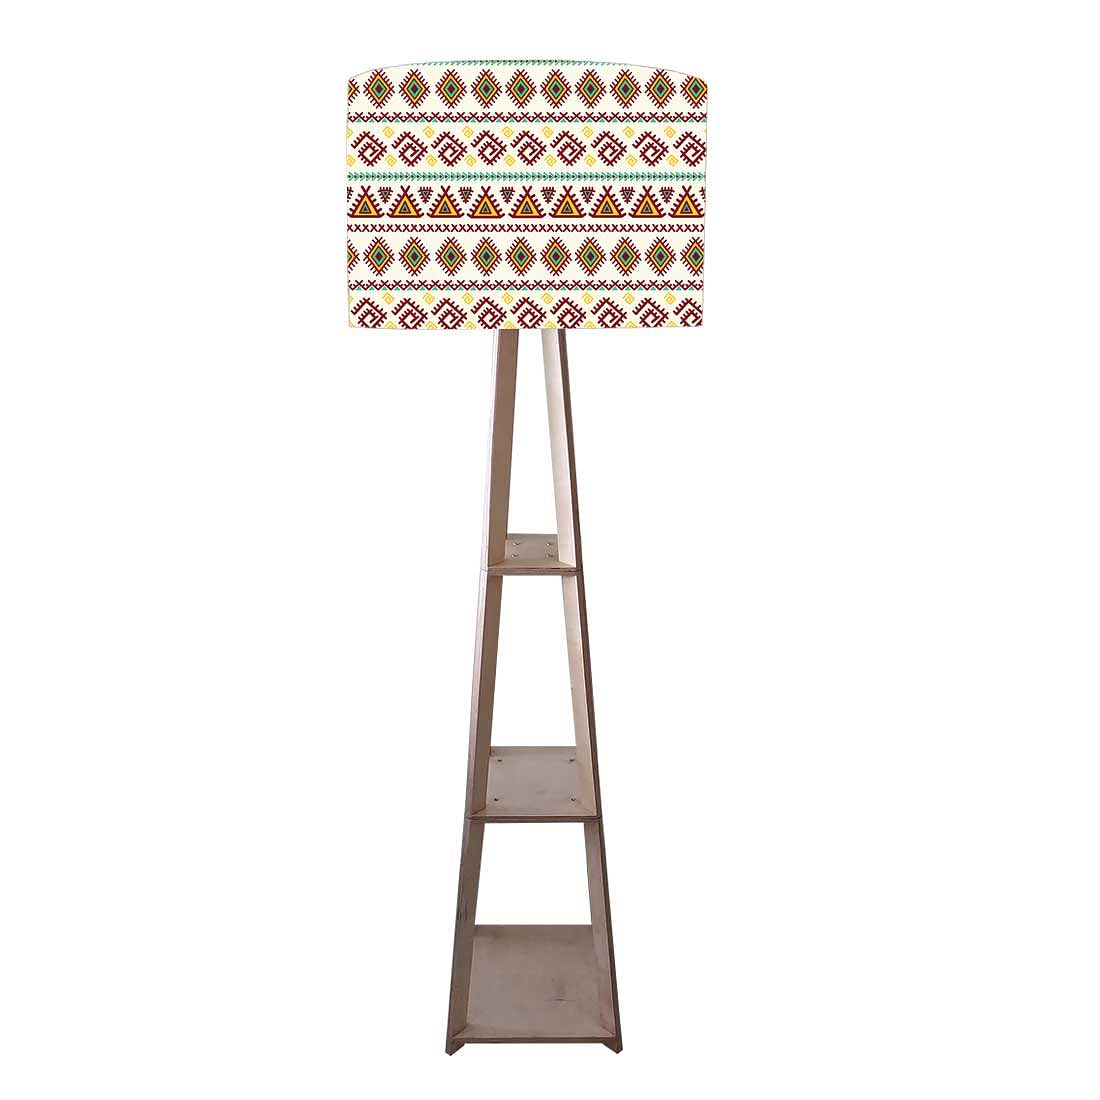 Floor Lamps For Living Room with Shelf - Aztec Pink Nutcase